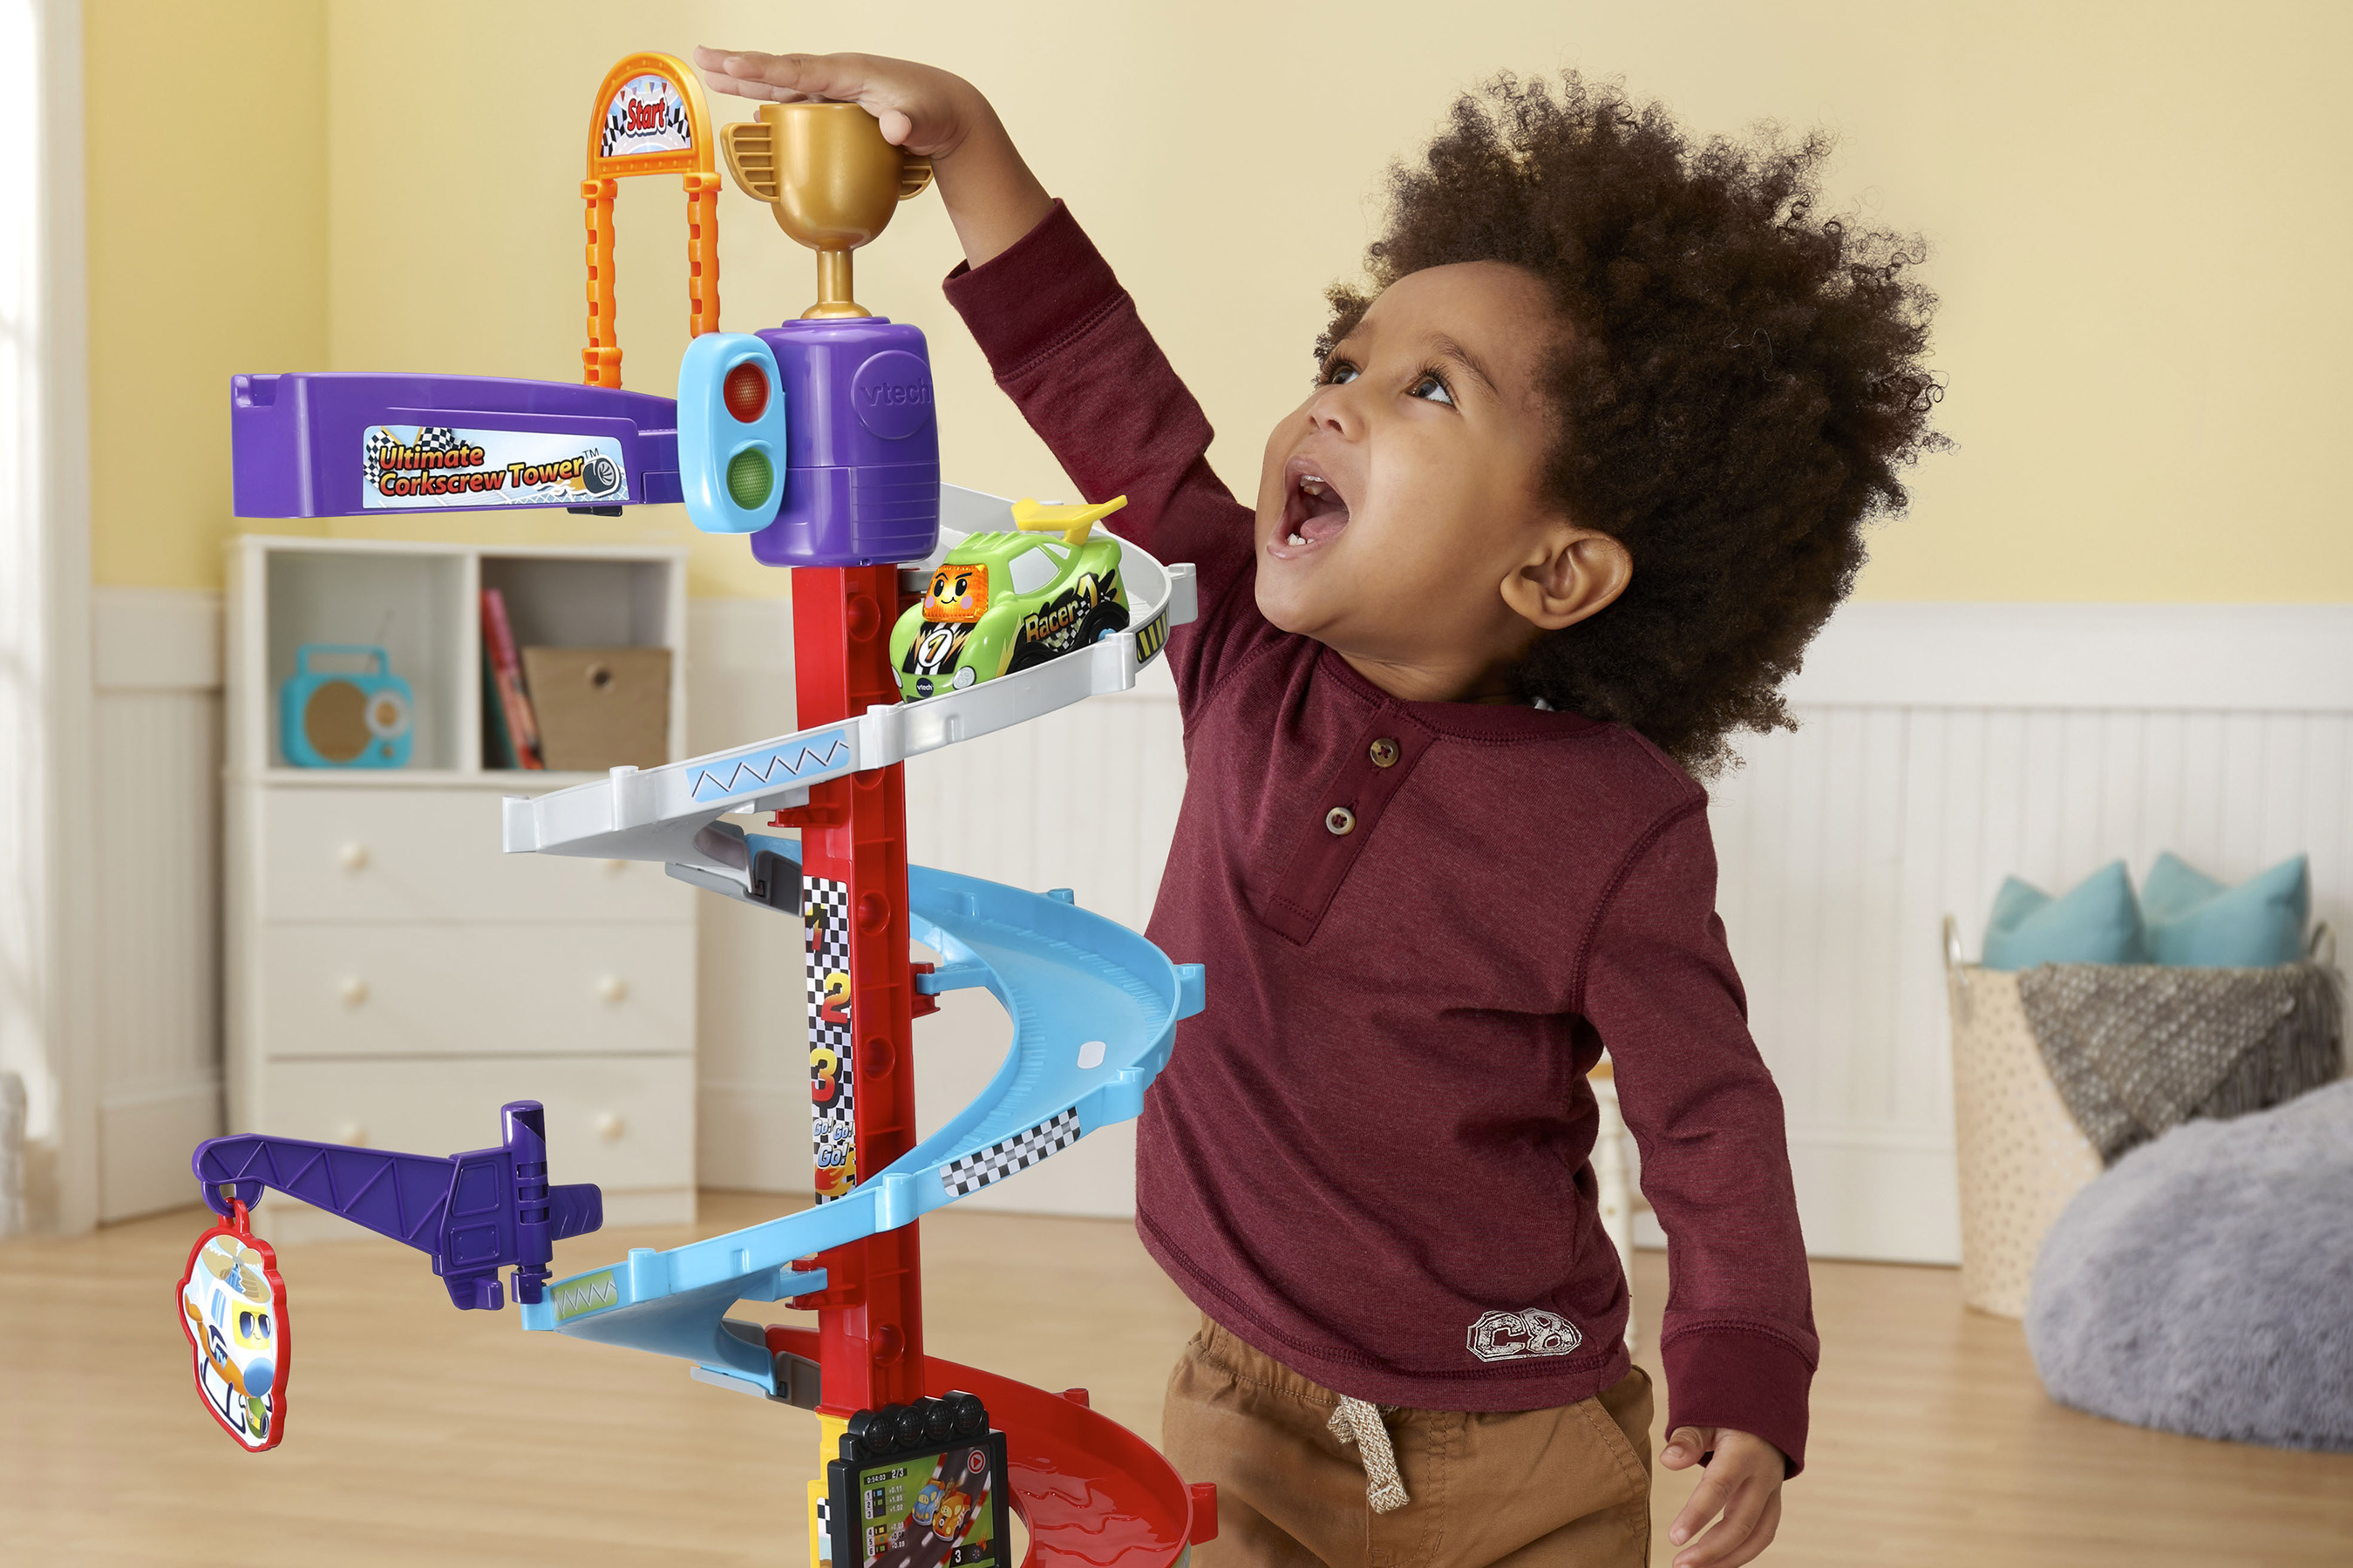 Kid playing with the VTech Ultimate Corkscrew Tower